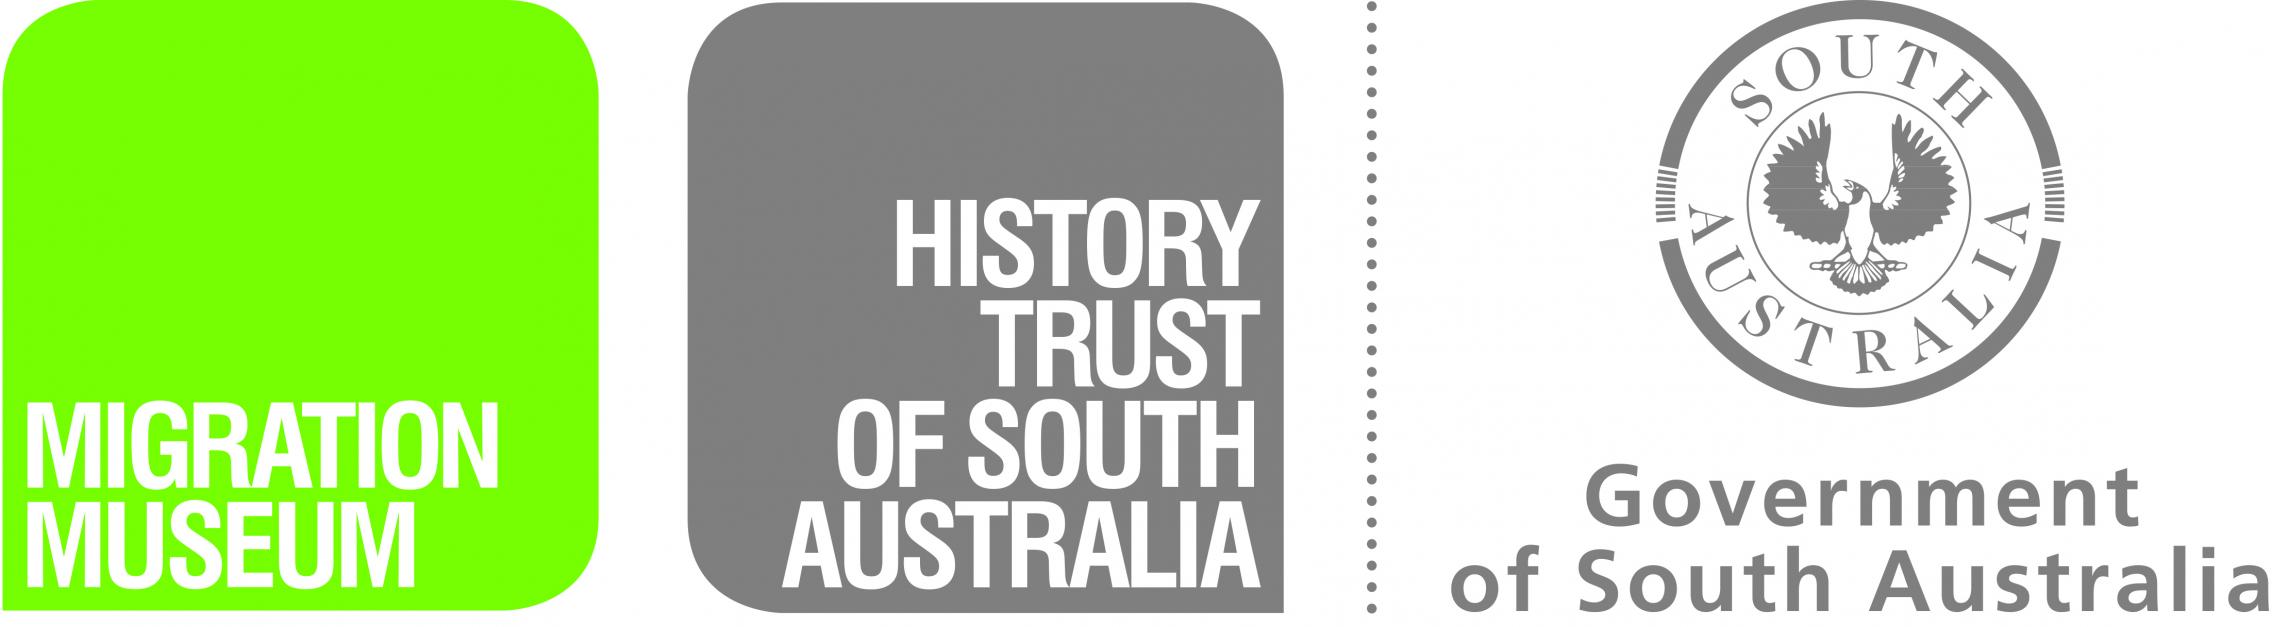 Migration Museum, History Trust of South Australia | Government of South Australia.